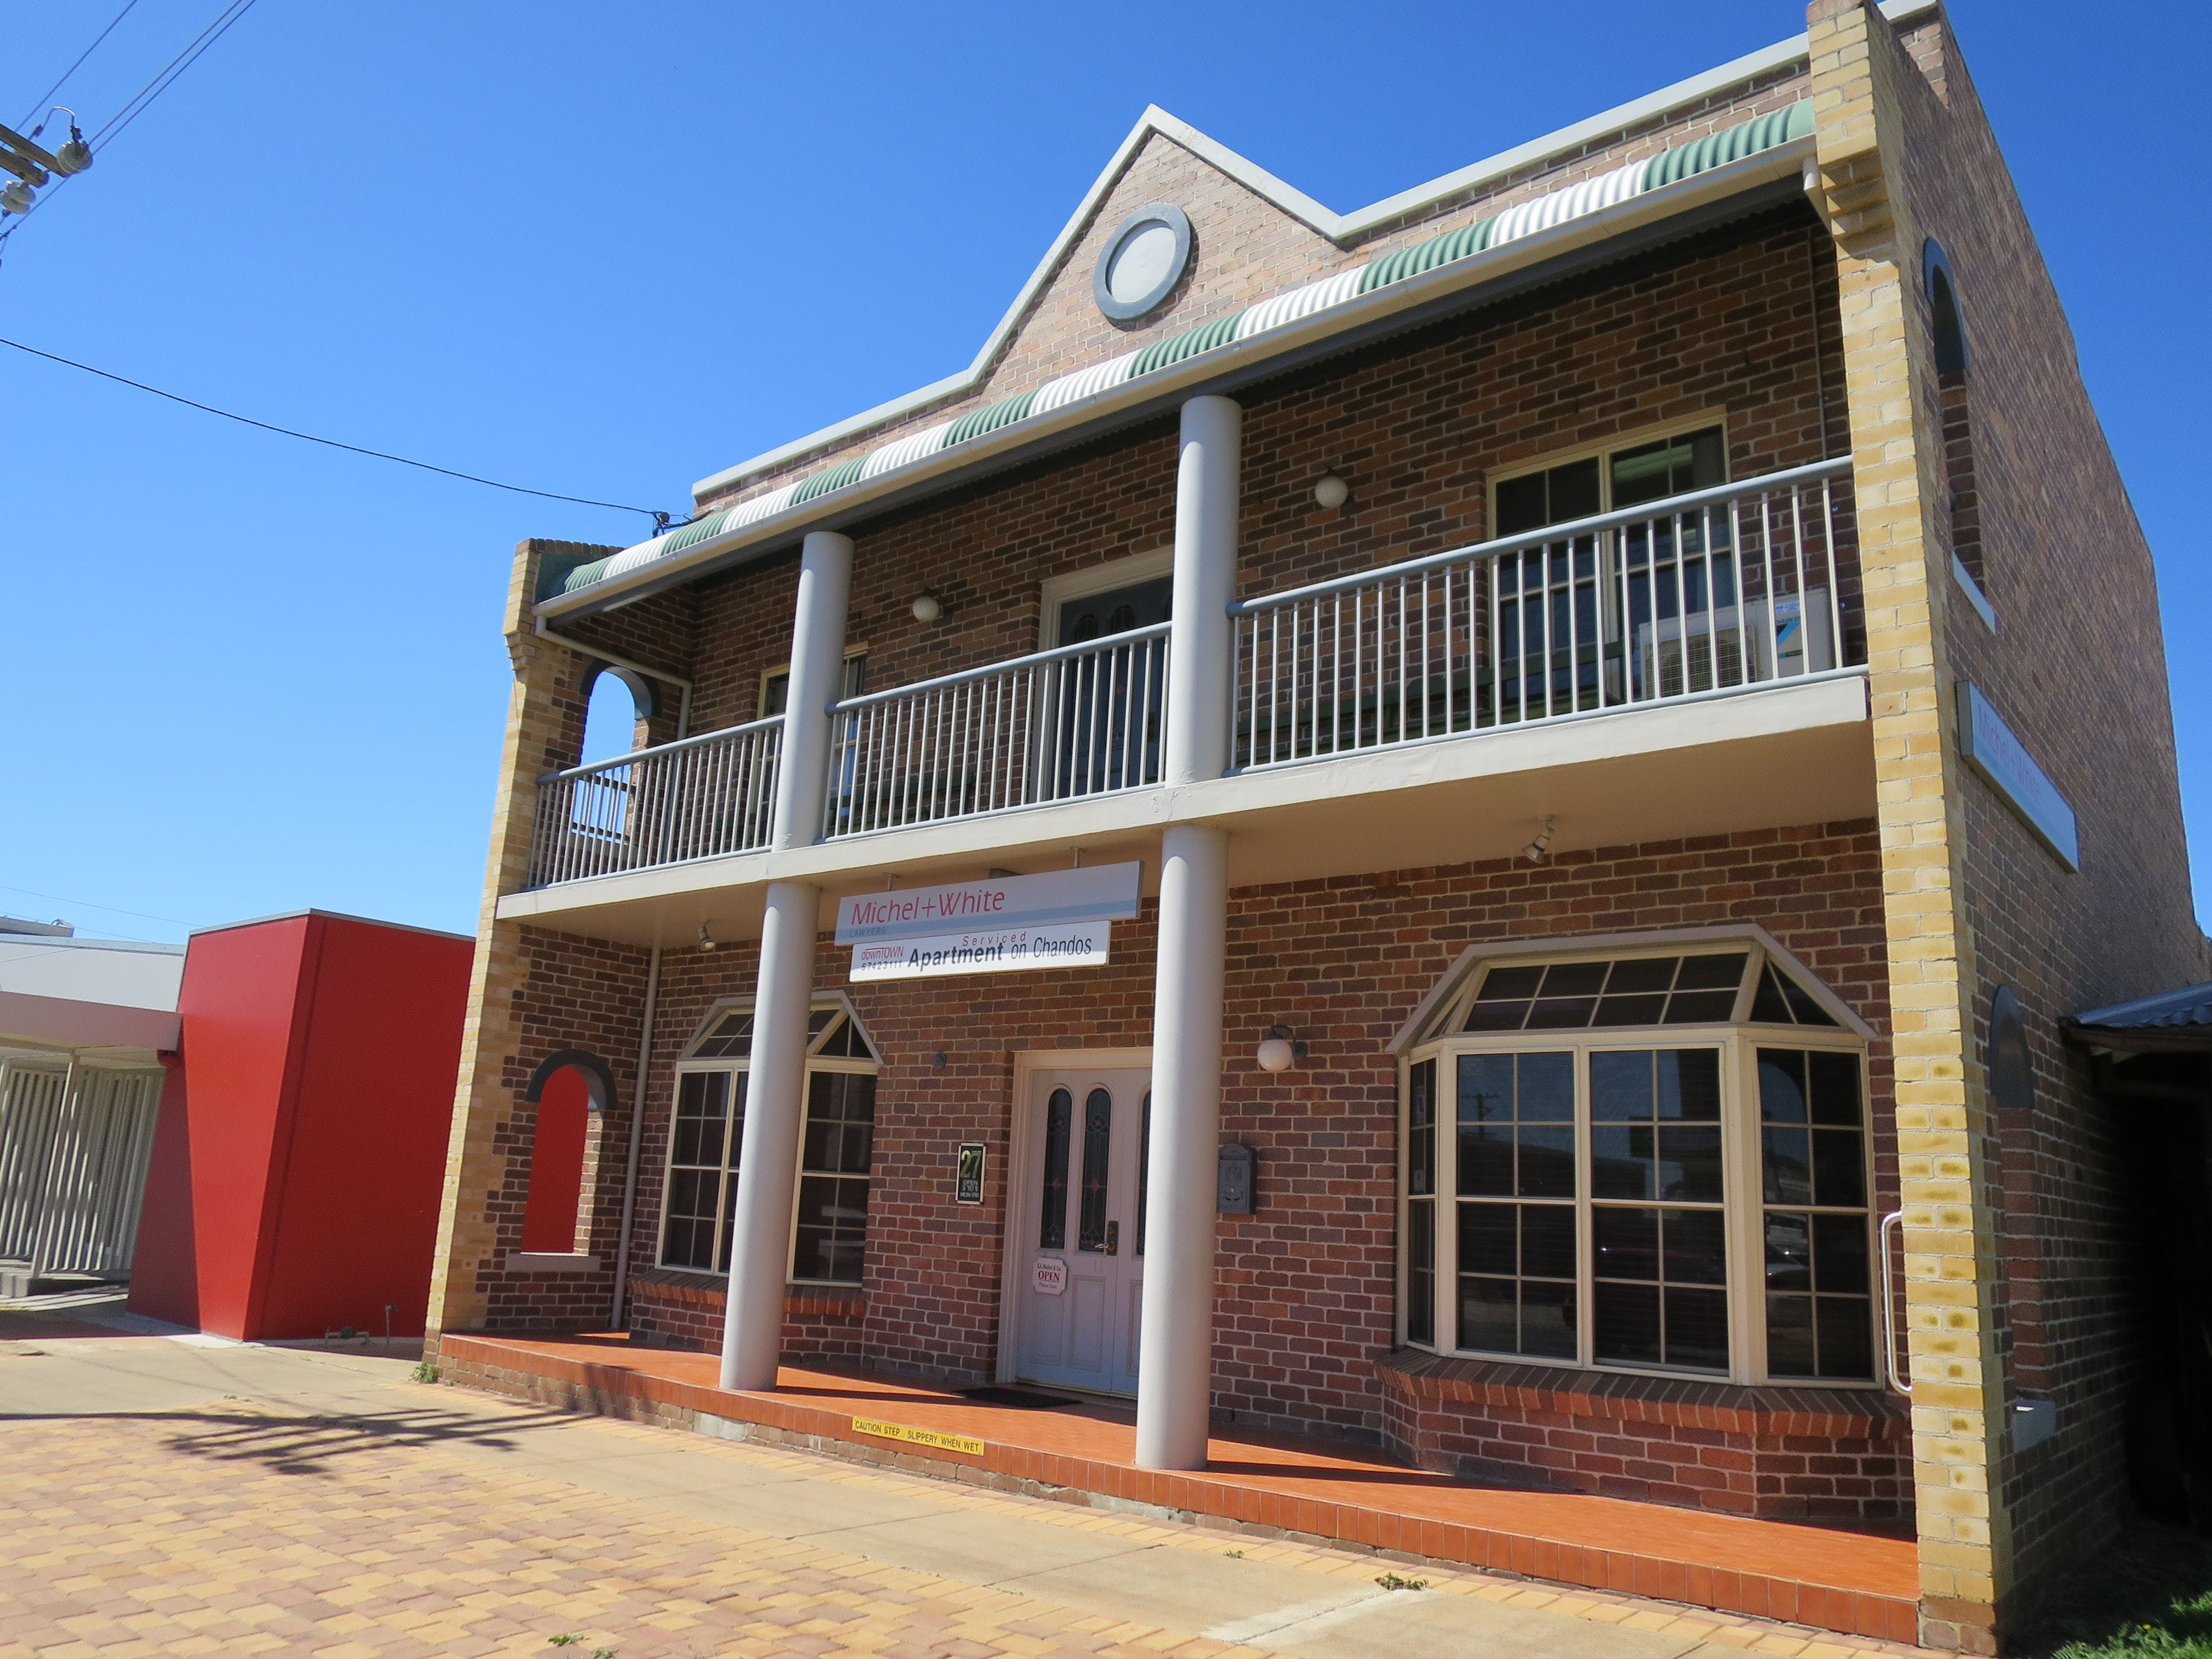 Downtown Apartment on Chandos - Accommodation Redcliffe